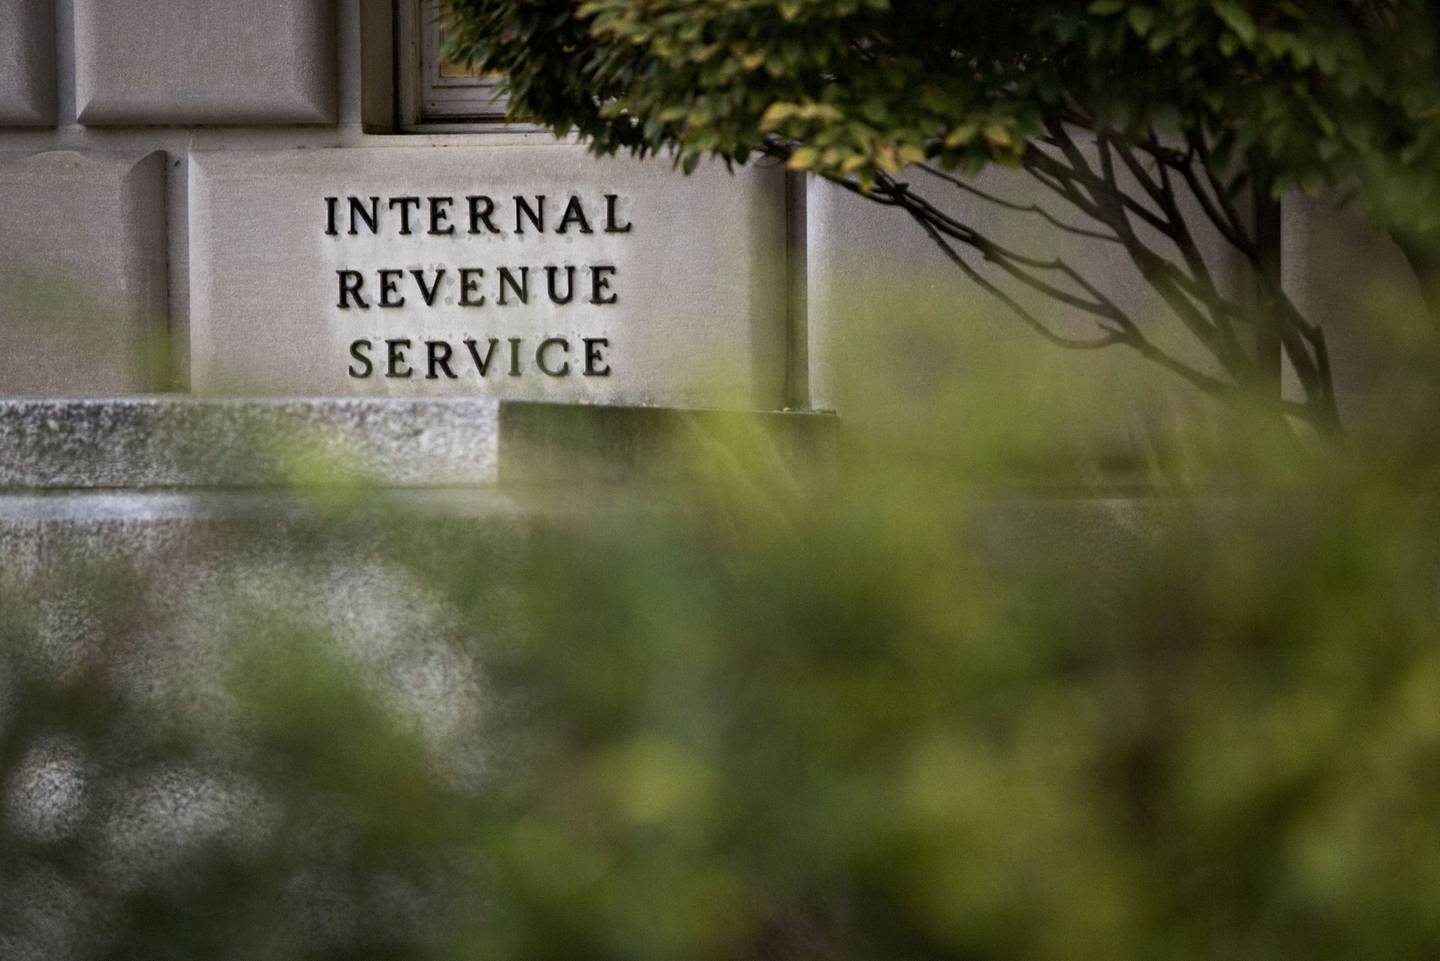 Signage is displayed outside the Internal Revenue Service (IRS) headquarters in Washington, D.C.